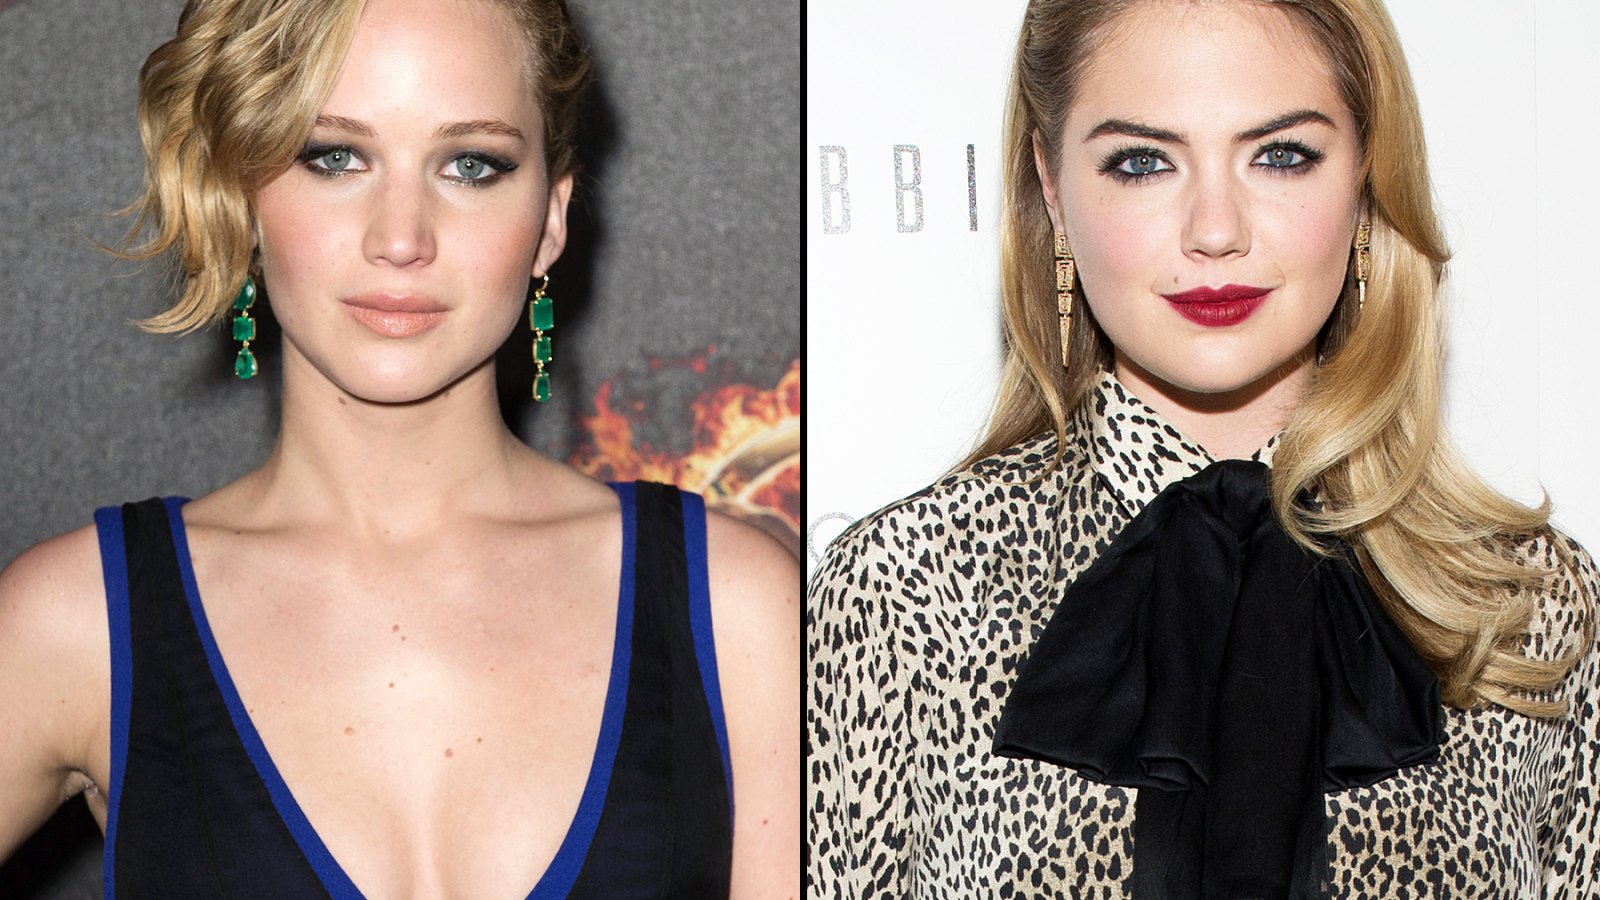 Jennifer Lawrence and Kate Upton were hit by the nude photo scandal.